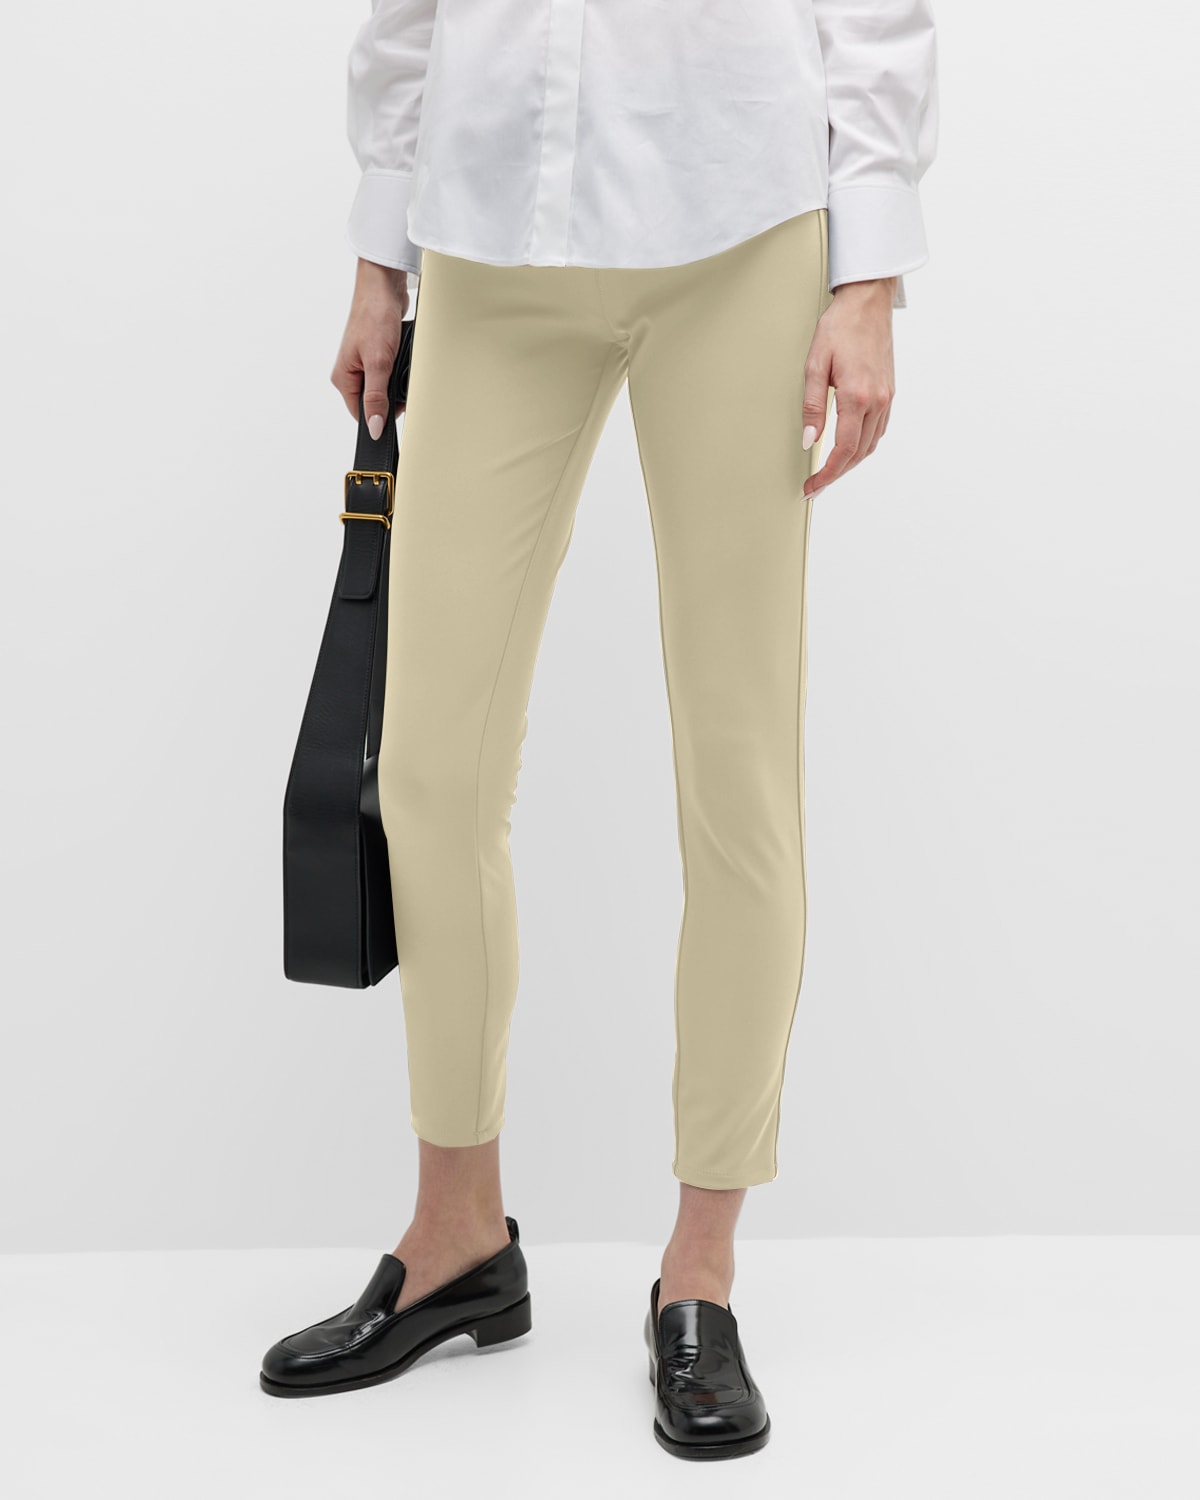 Lafayette 148 Plus Size Mercer Acclaimed Stretch Skinny Jeans In Sand